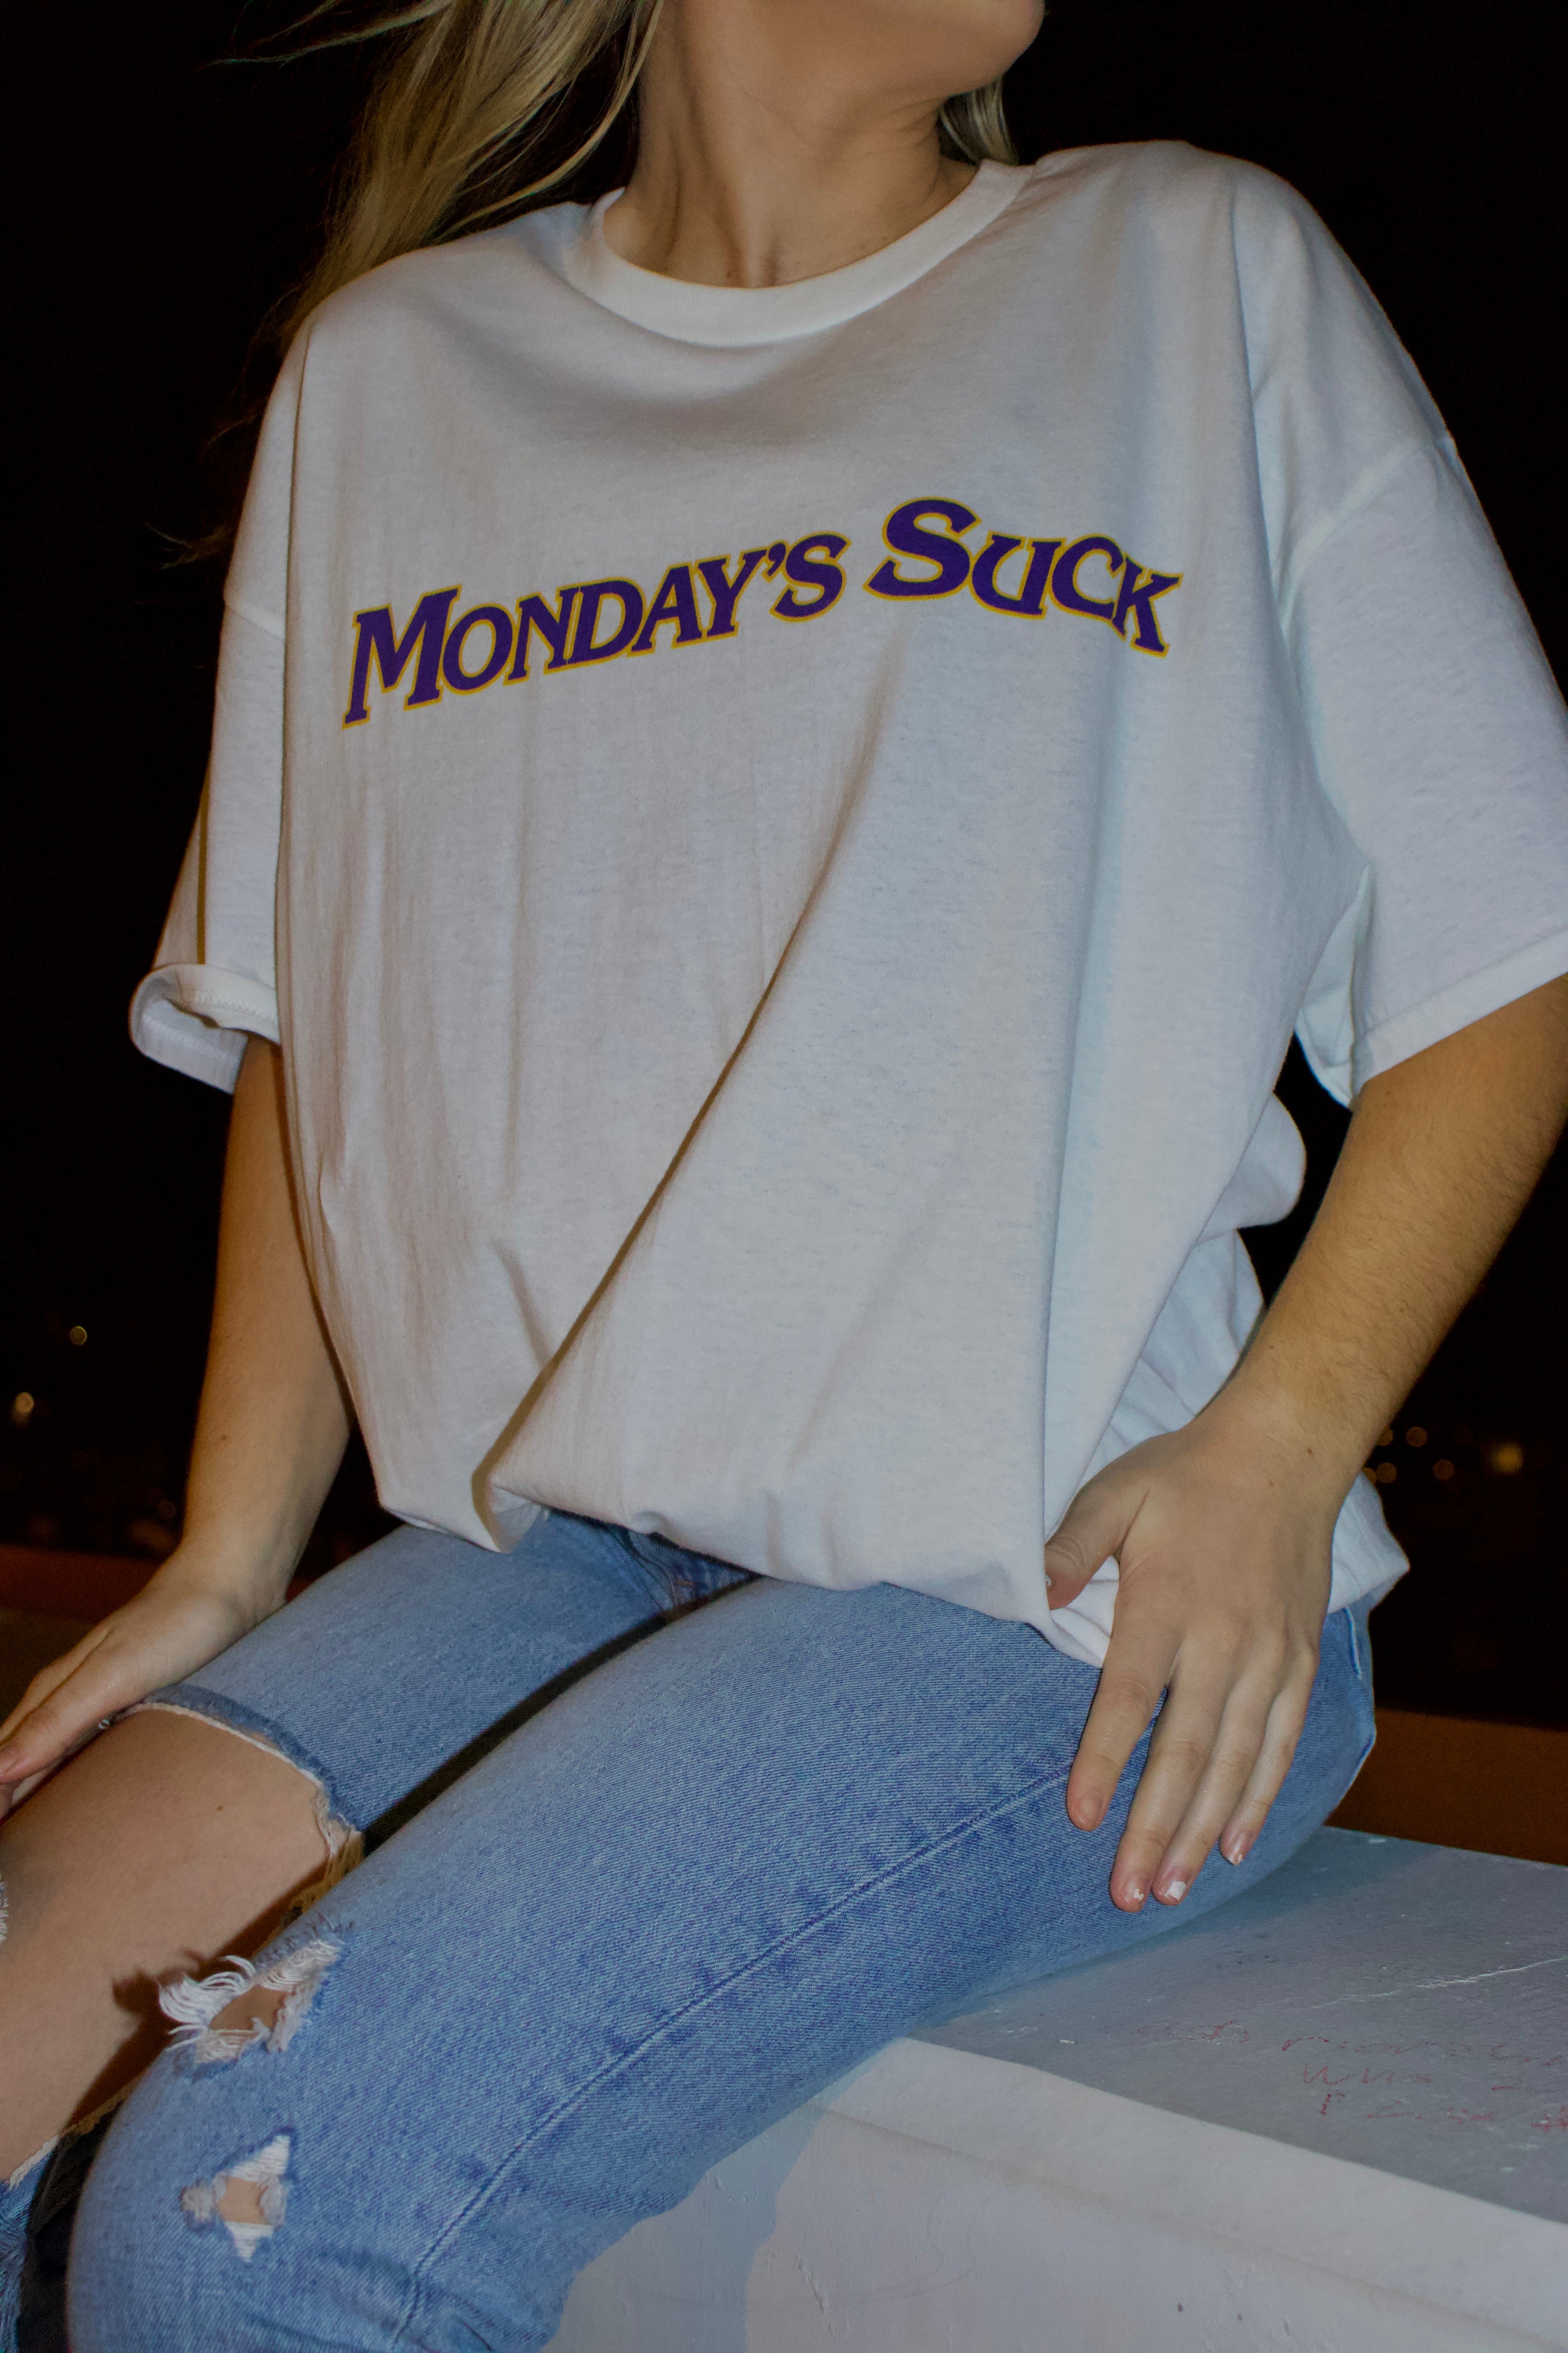 MS Lakers Trucker Hat (Side Patch) – Monday's Suck